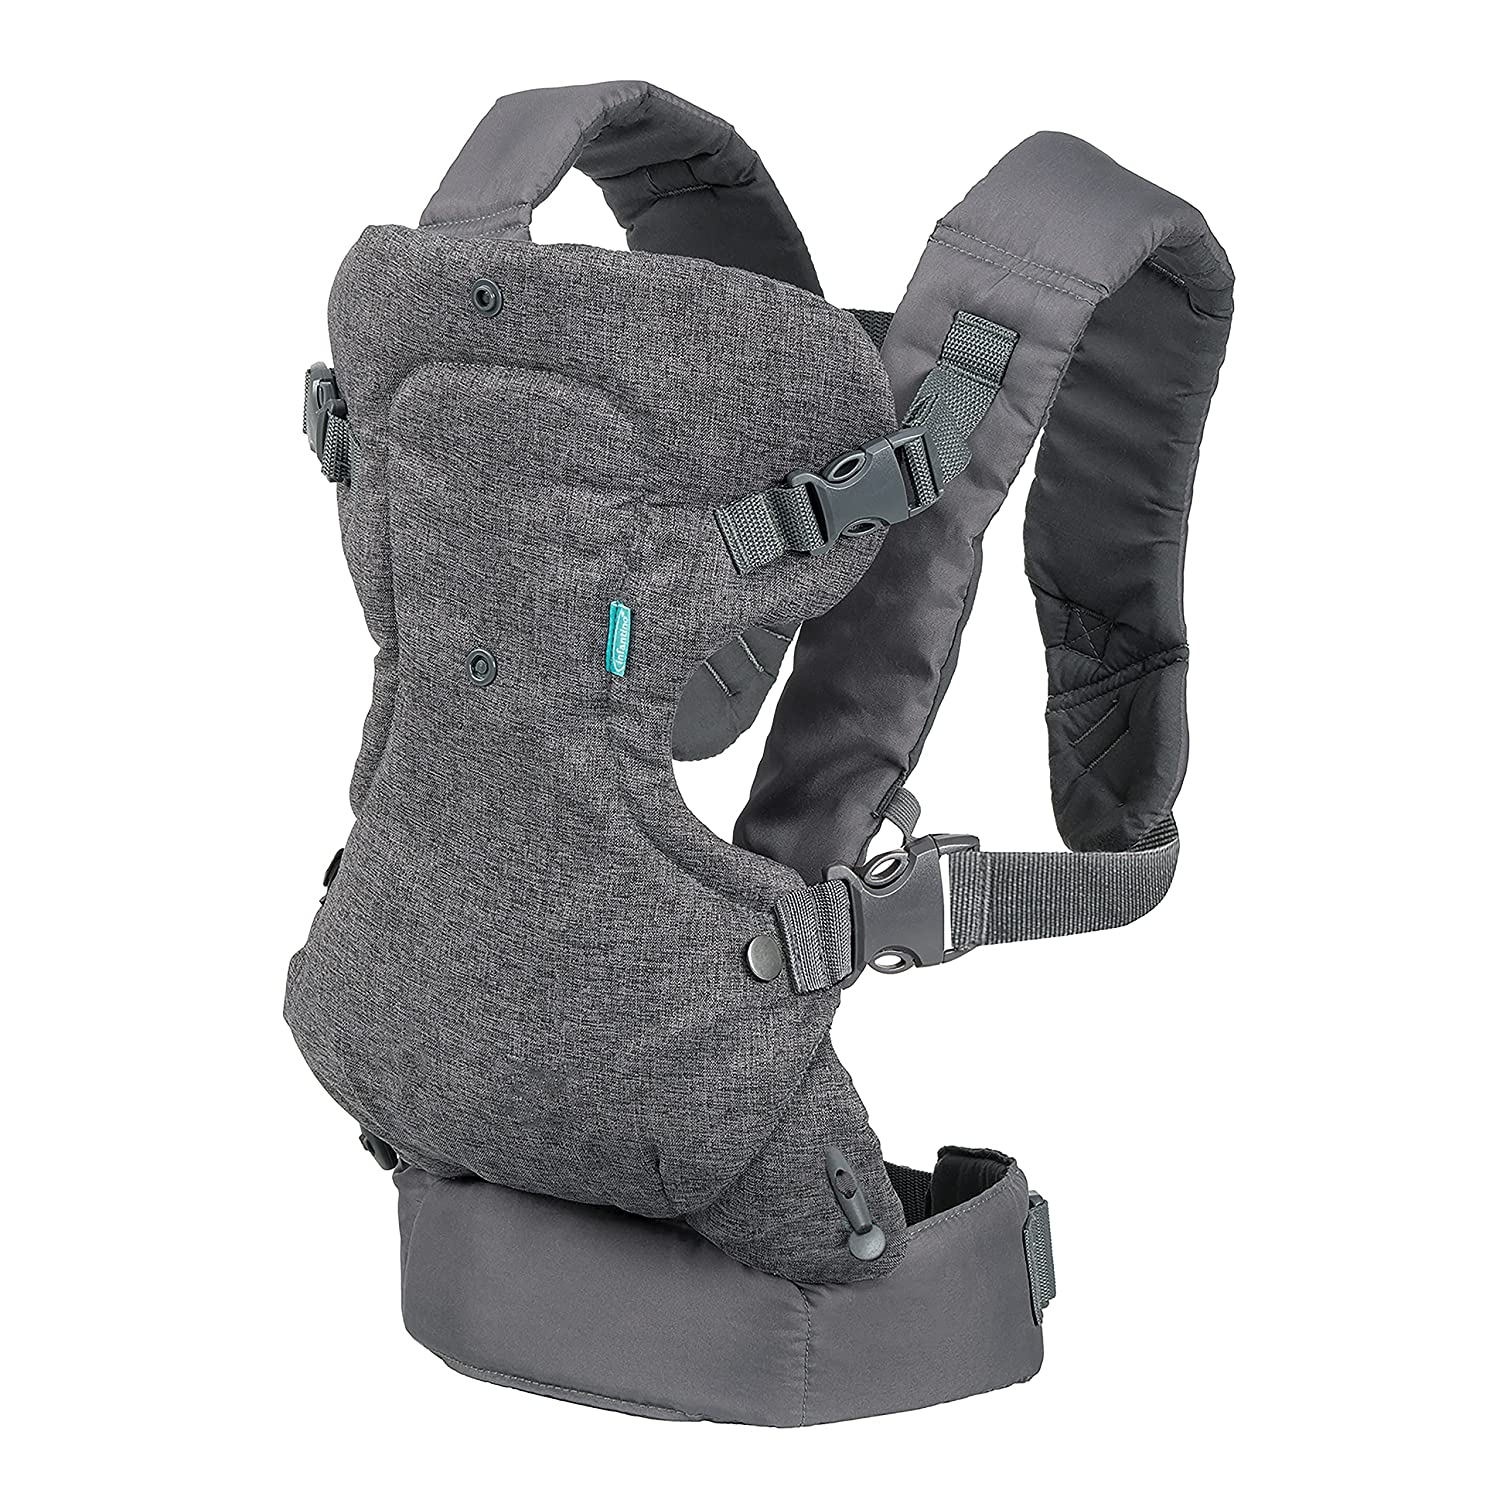 Infantino baby carrier for travel